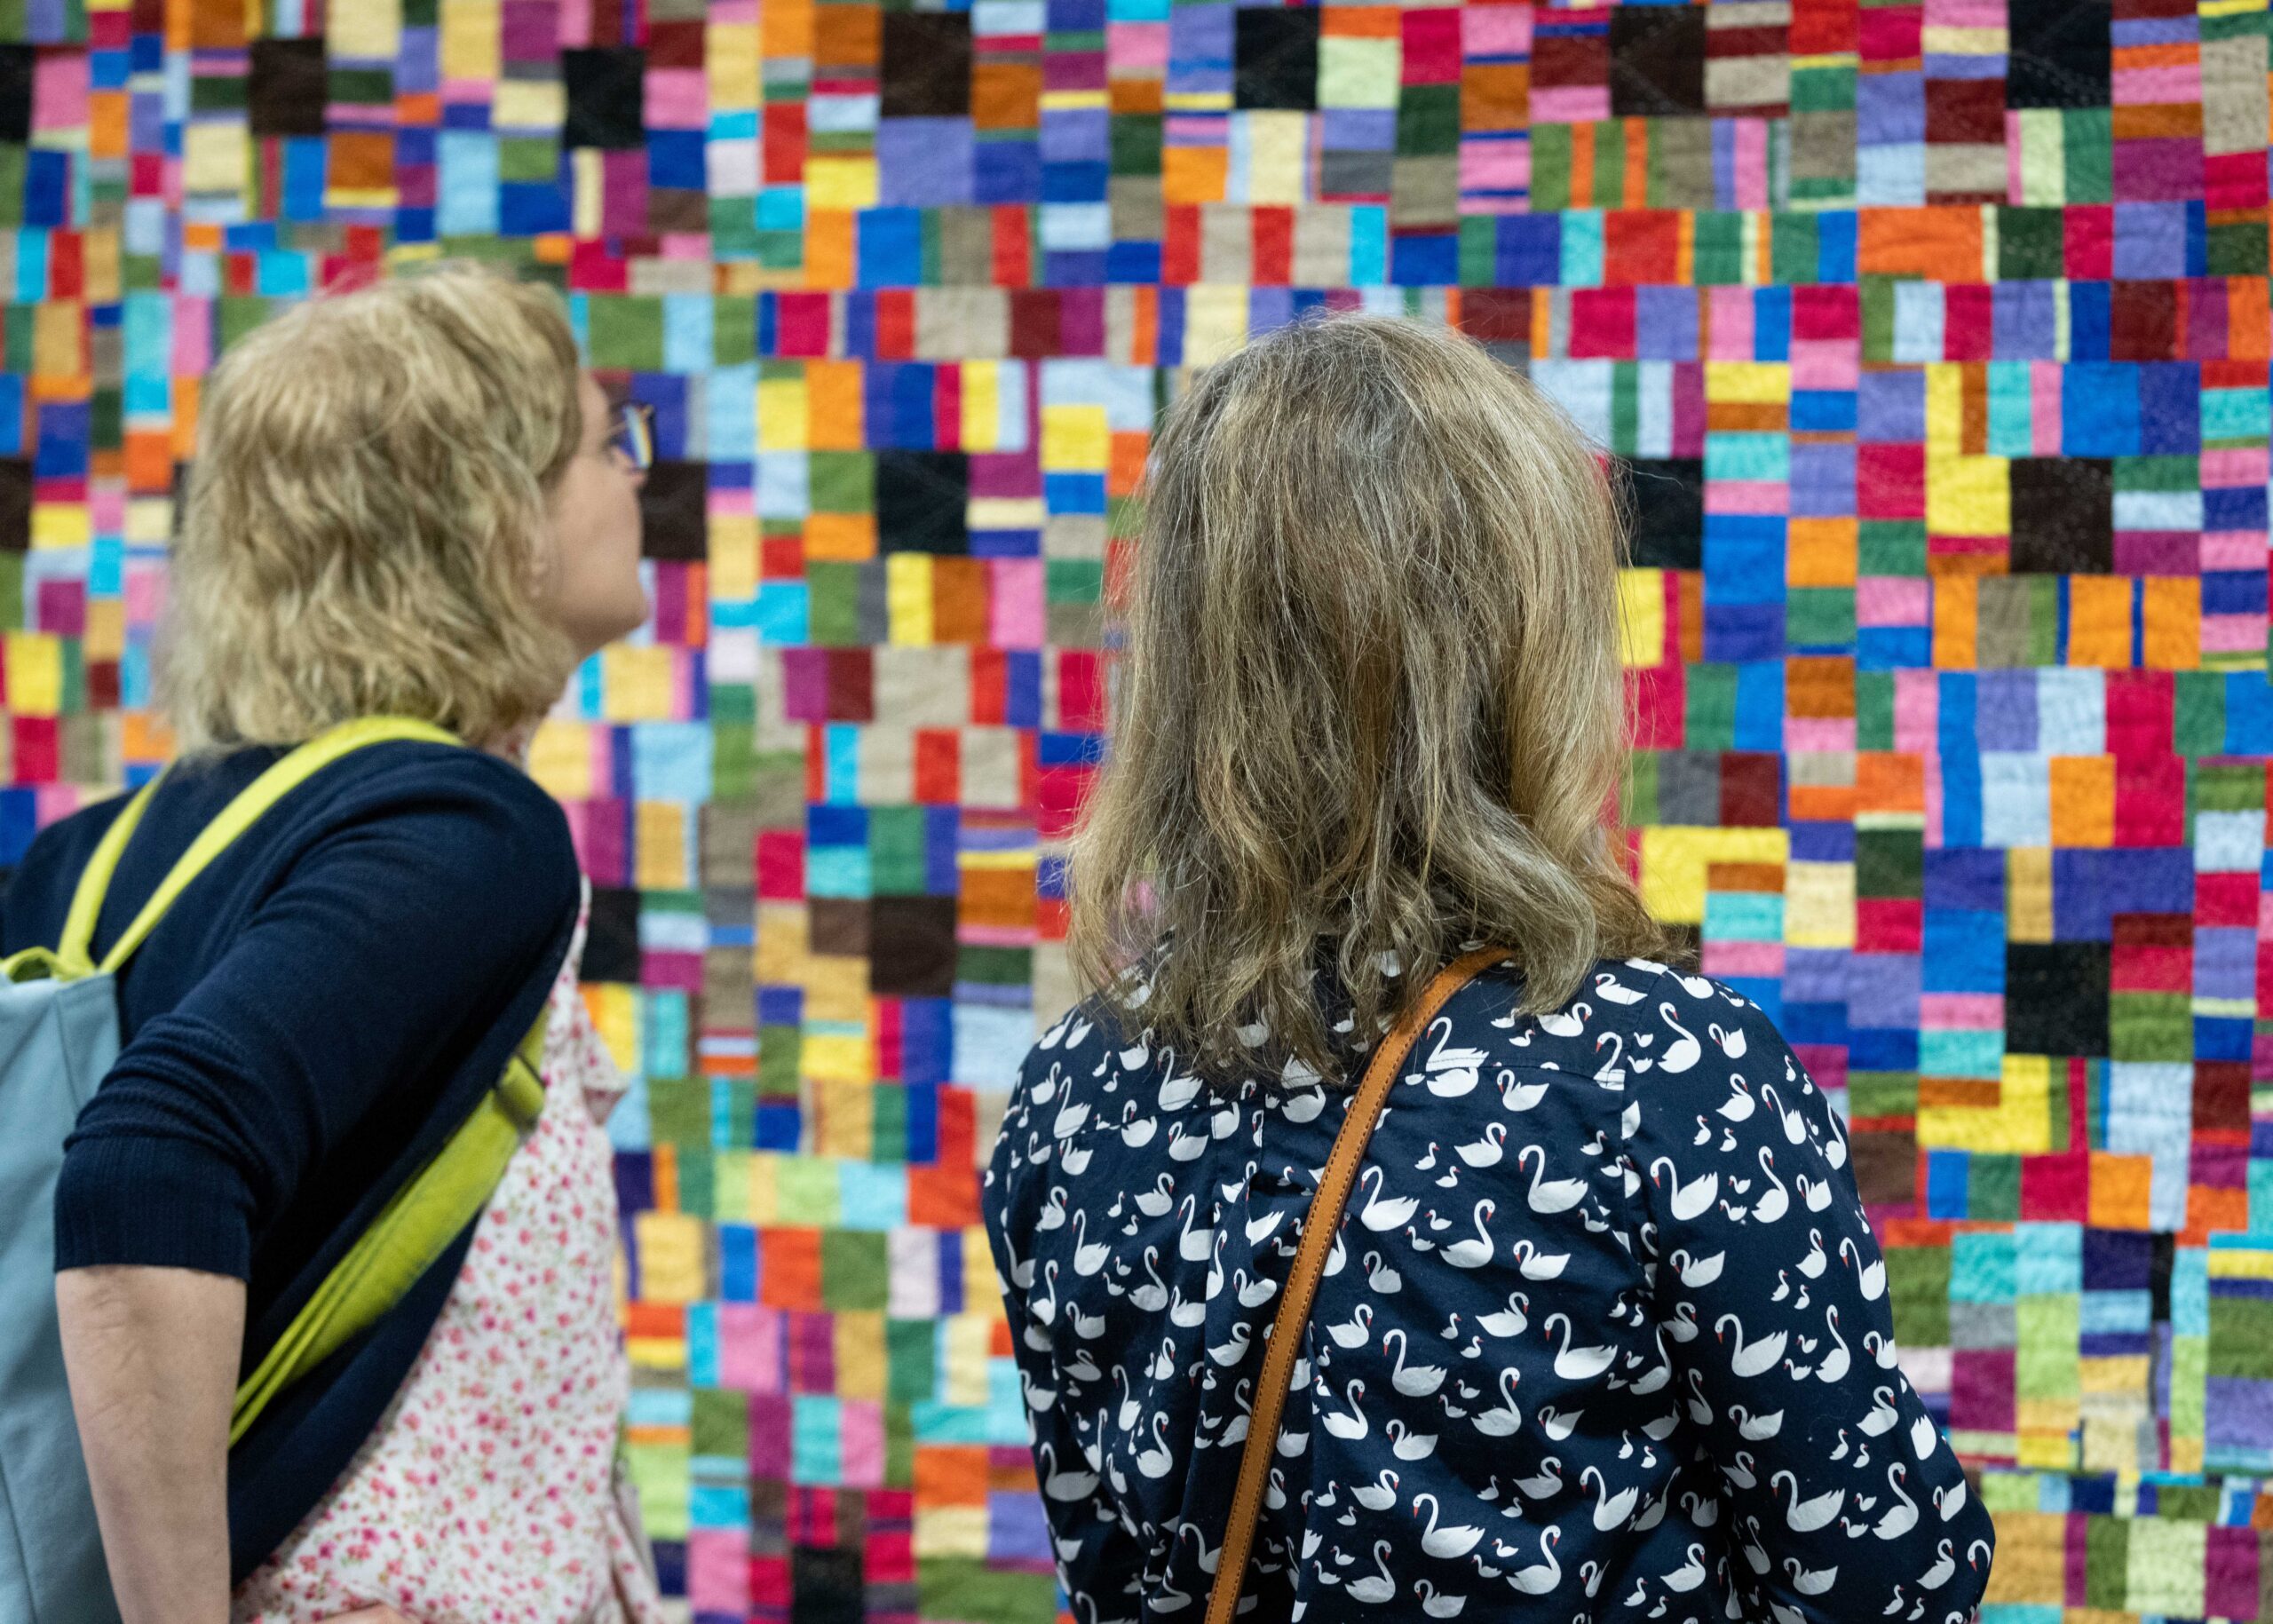 an image of two people looking at the colorful quilt Cotton Sofisticate by Chawne Kimber